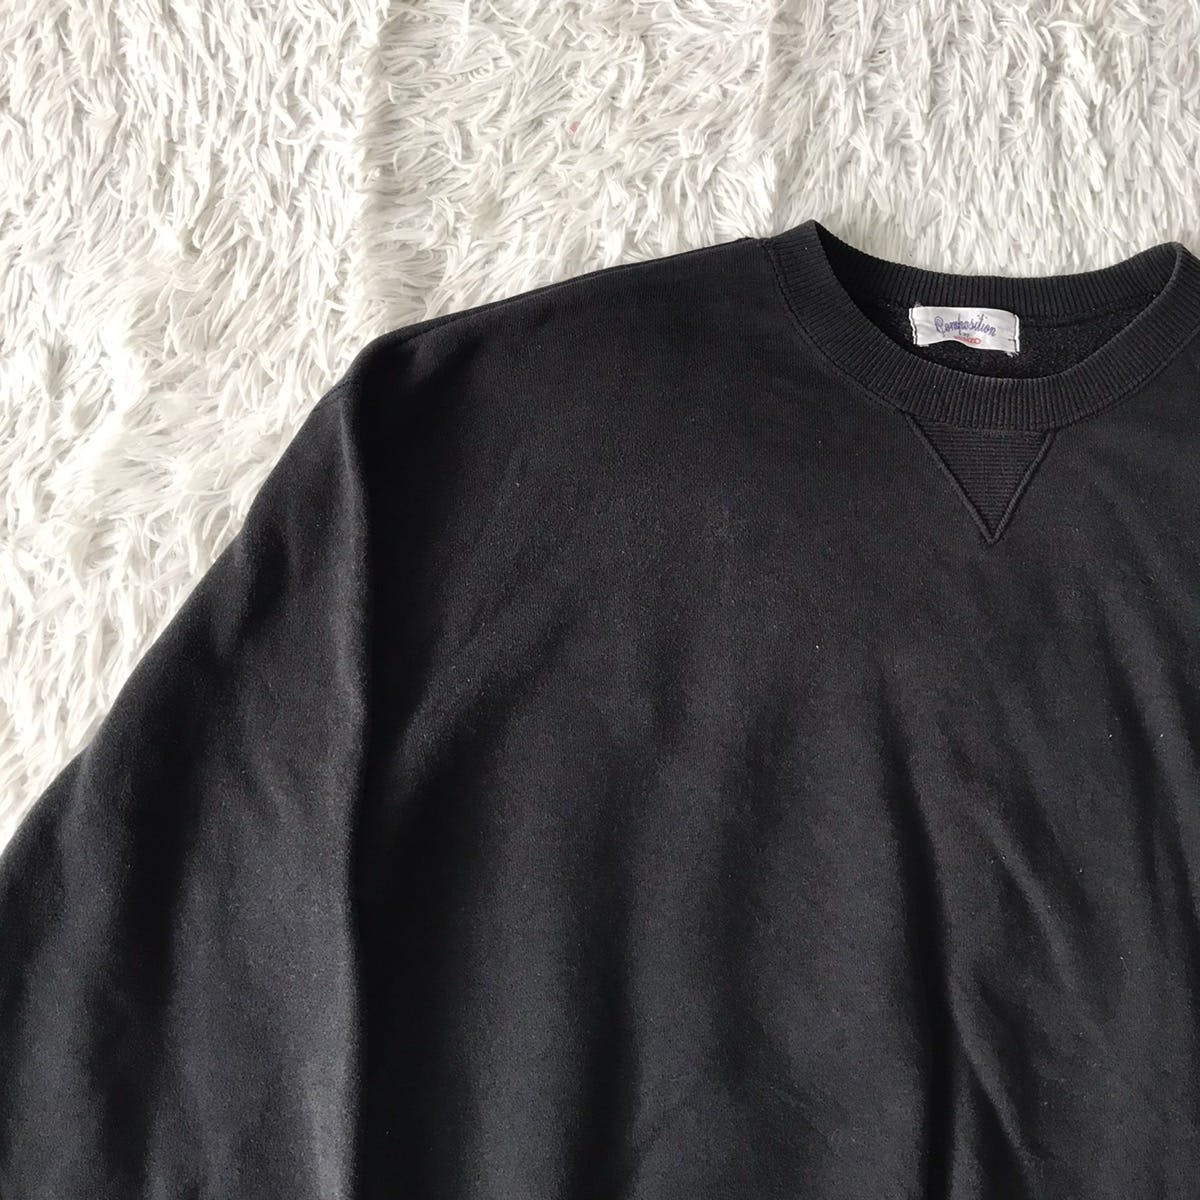 Composition By Kenzo Sweatshirt Made in Japan - 6